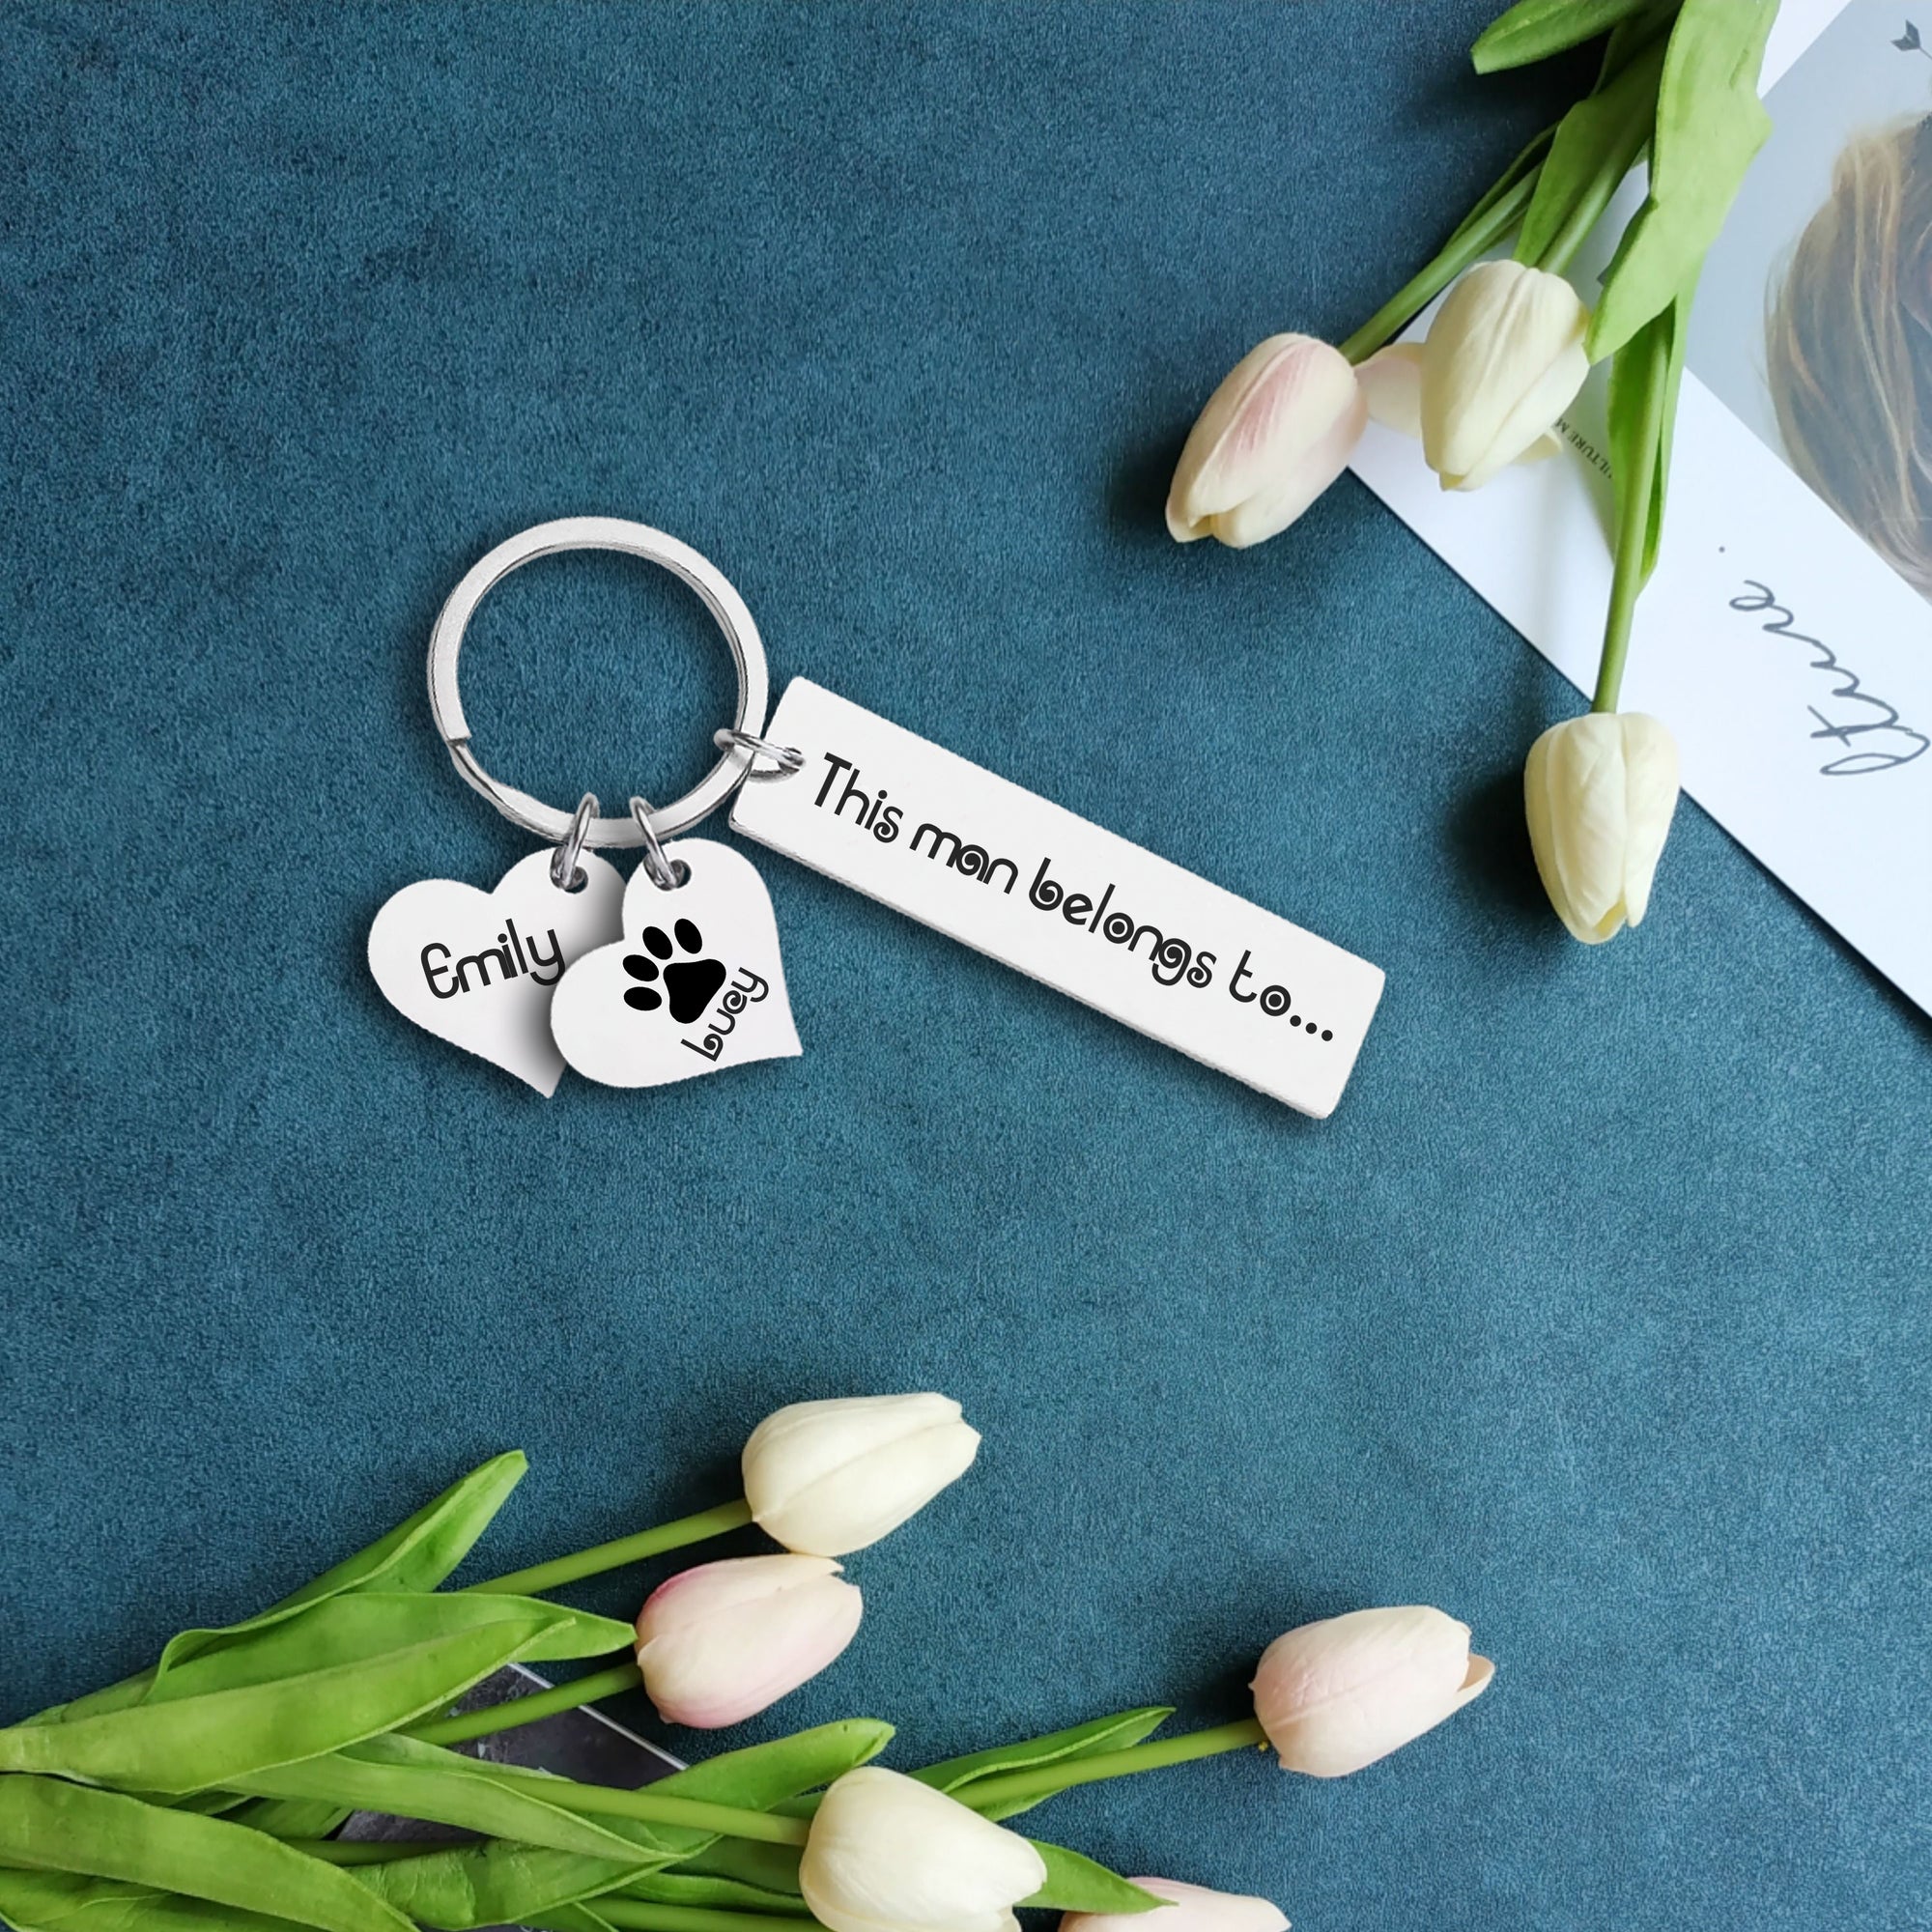 Personalised Paw Prints Keychain - Dachshund - To My Man - This Important To Me - Ukgkc26008